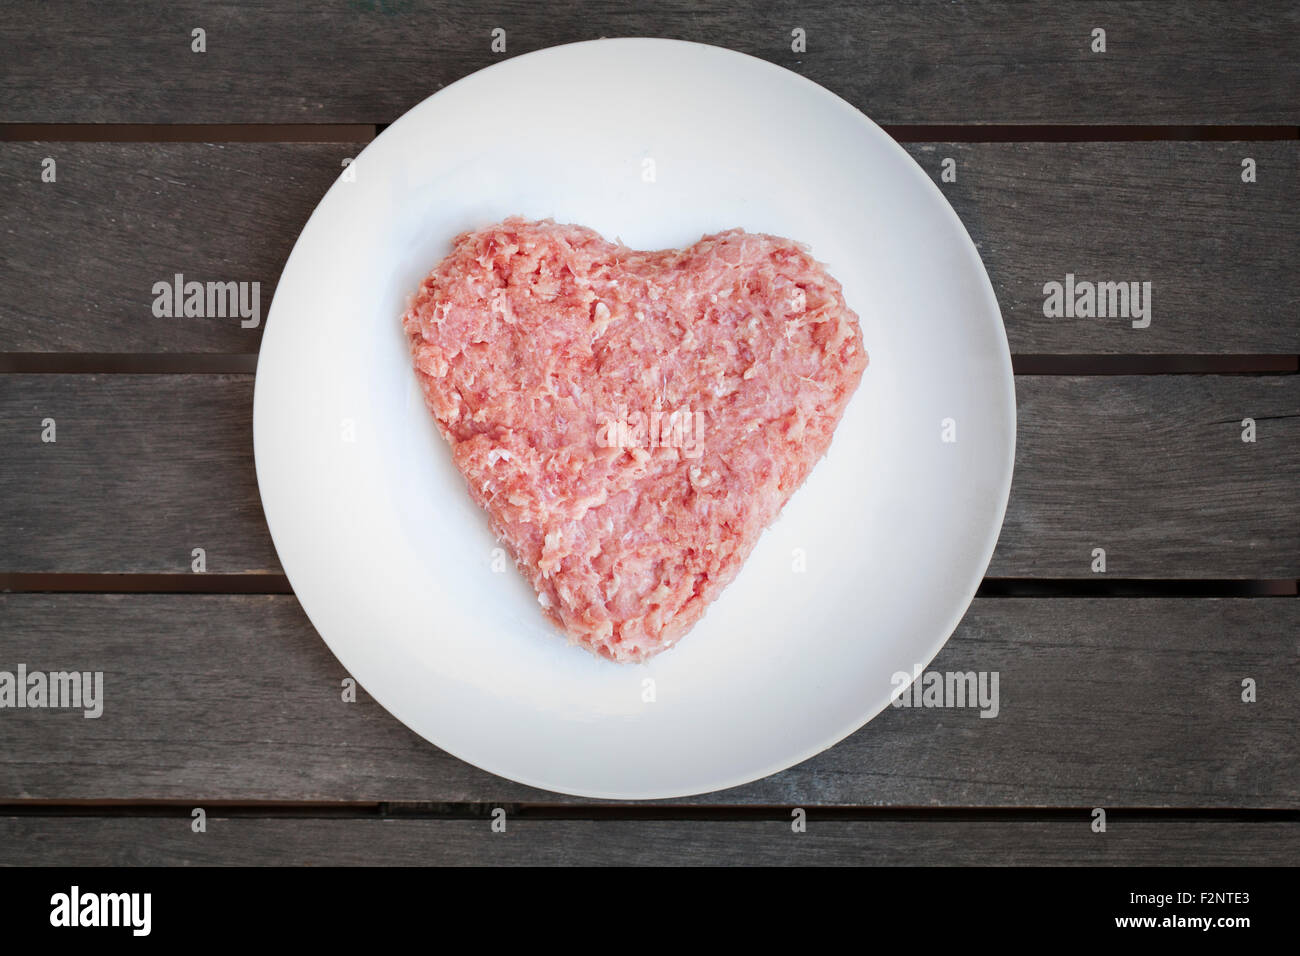 Heart-shaped raw minced meat Stock Photo